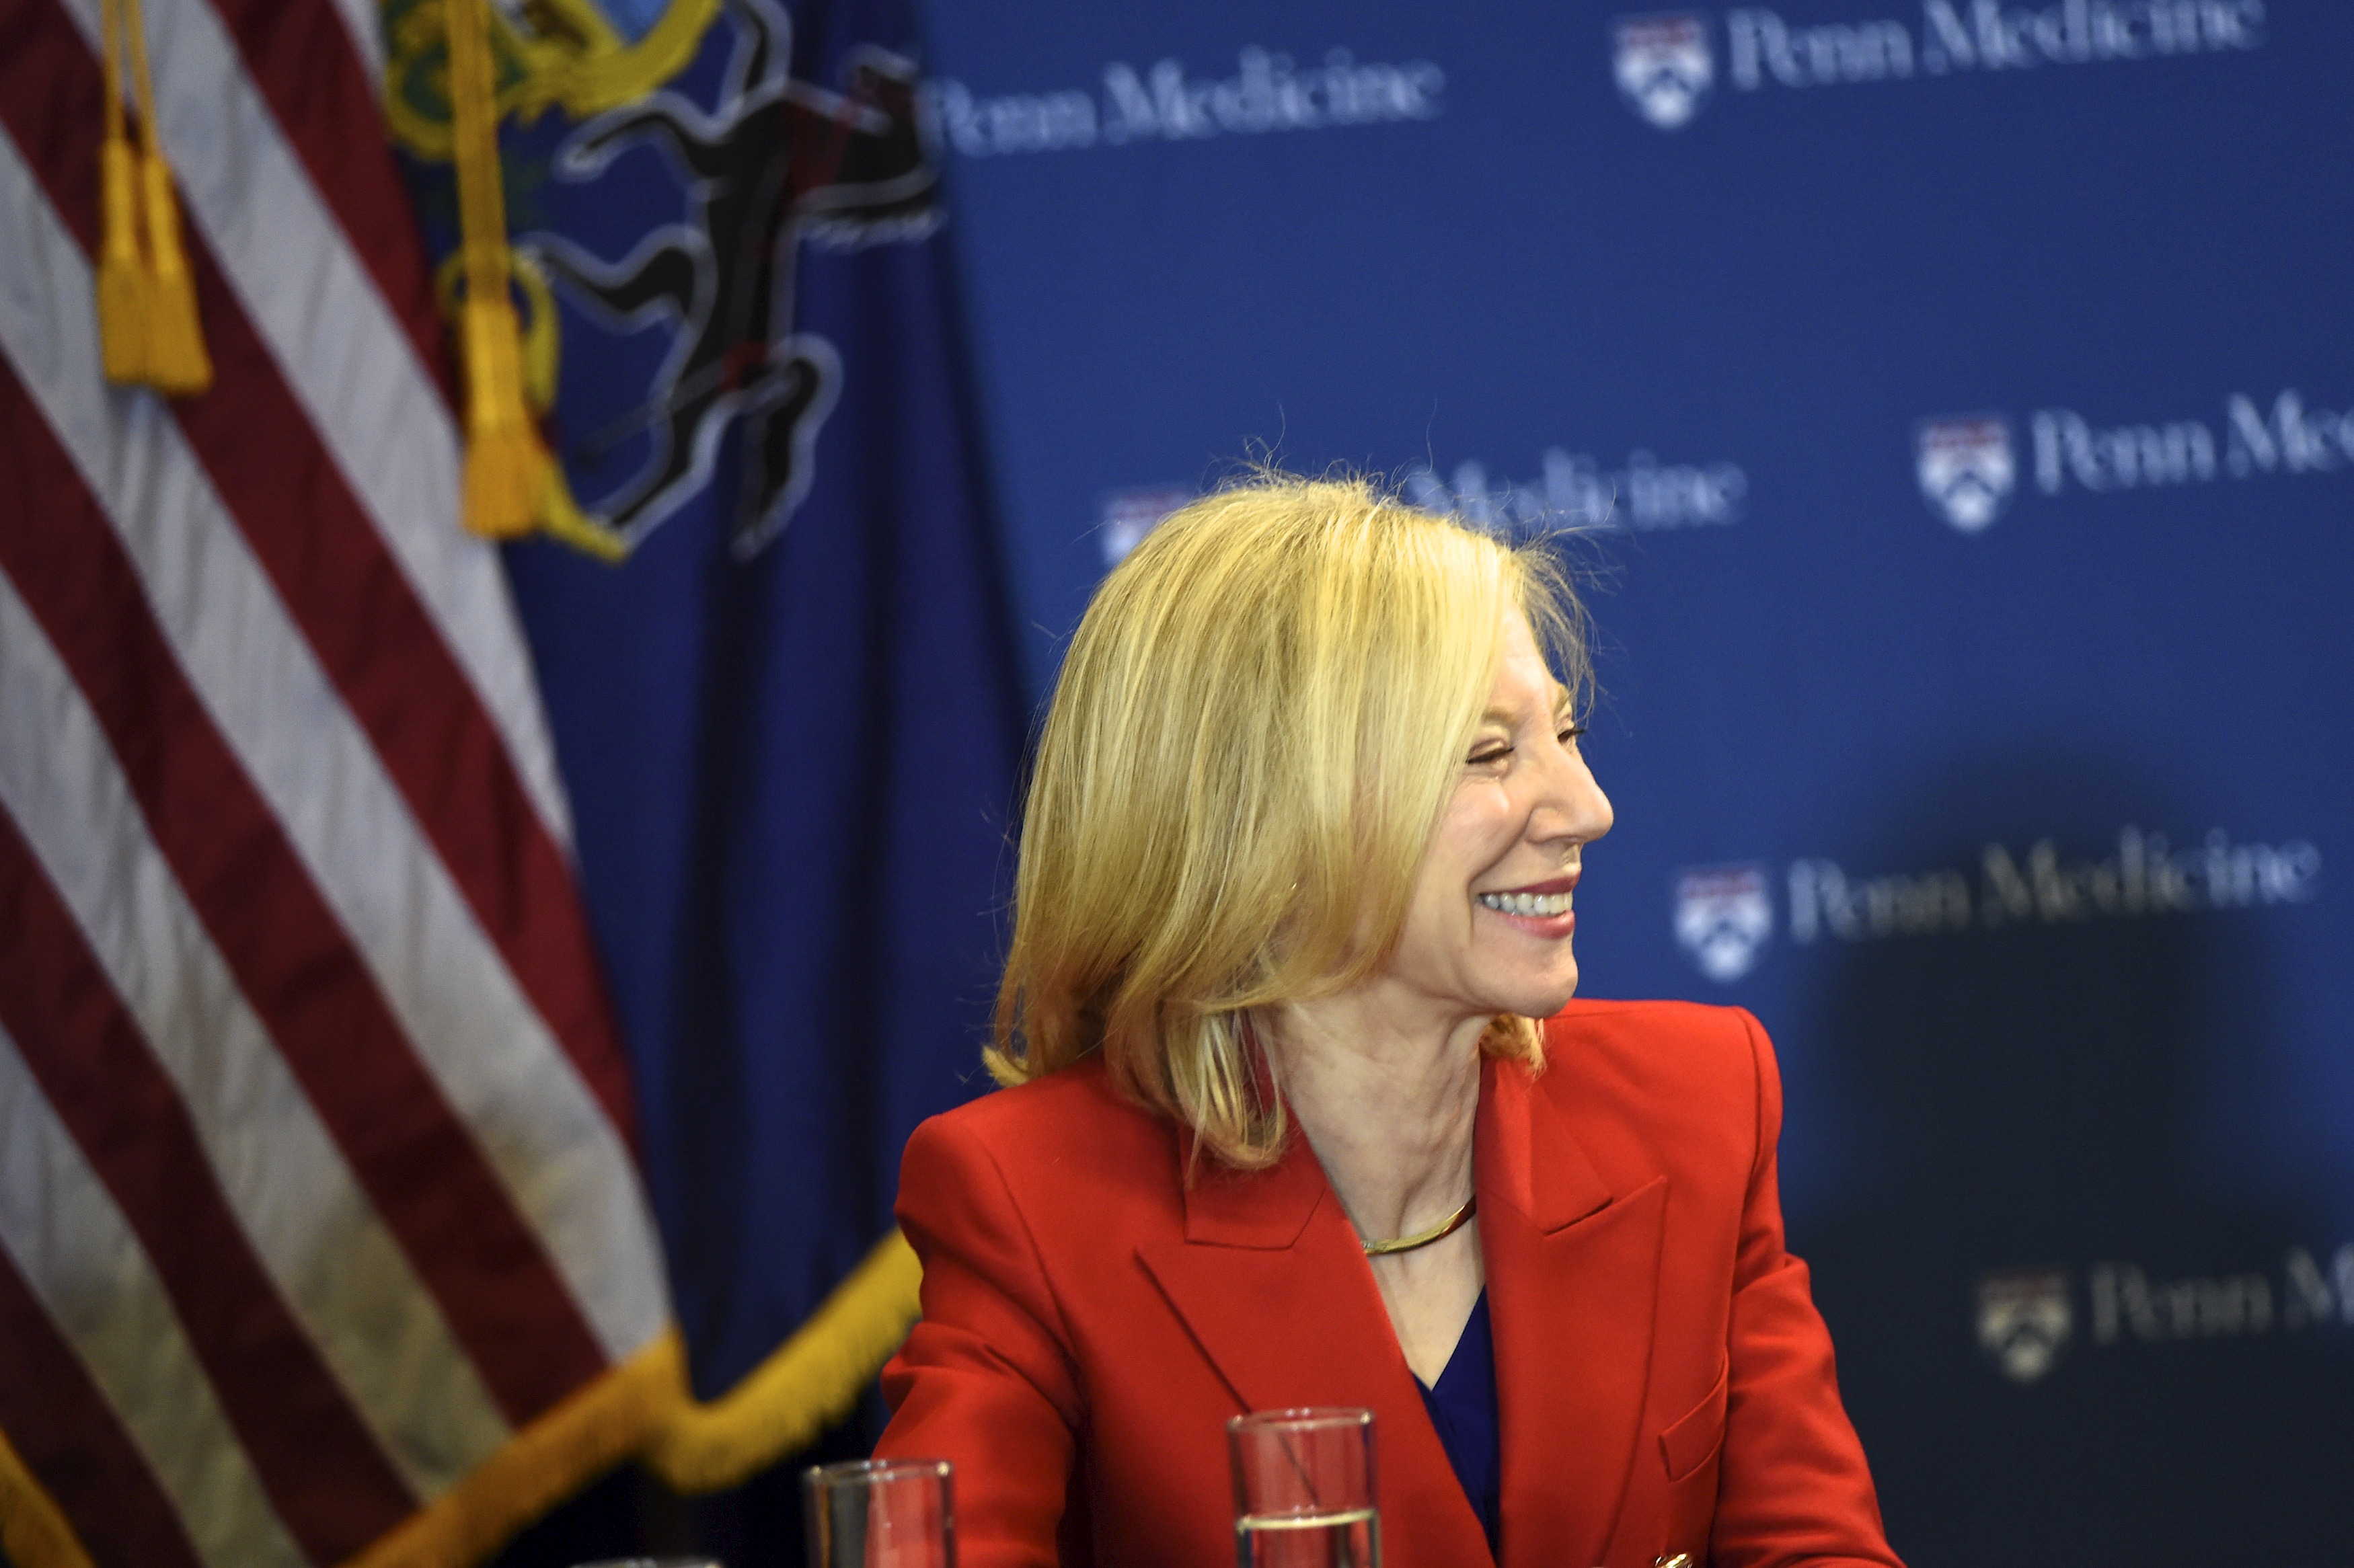 University of Pennsylvania President Amy Gutmann participates in a roundtable discussion with Vice President Joe Biden at the Perelman School of Medicine and Abramson Cancer Center in Philadelphia, Pennsylvania January 15, 2016.  REUTERS/Mark Makela